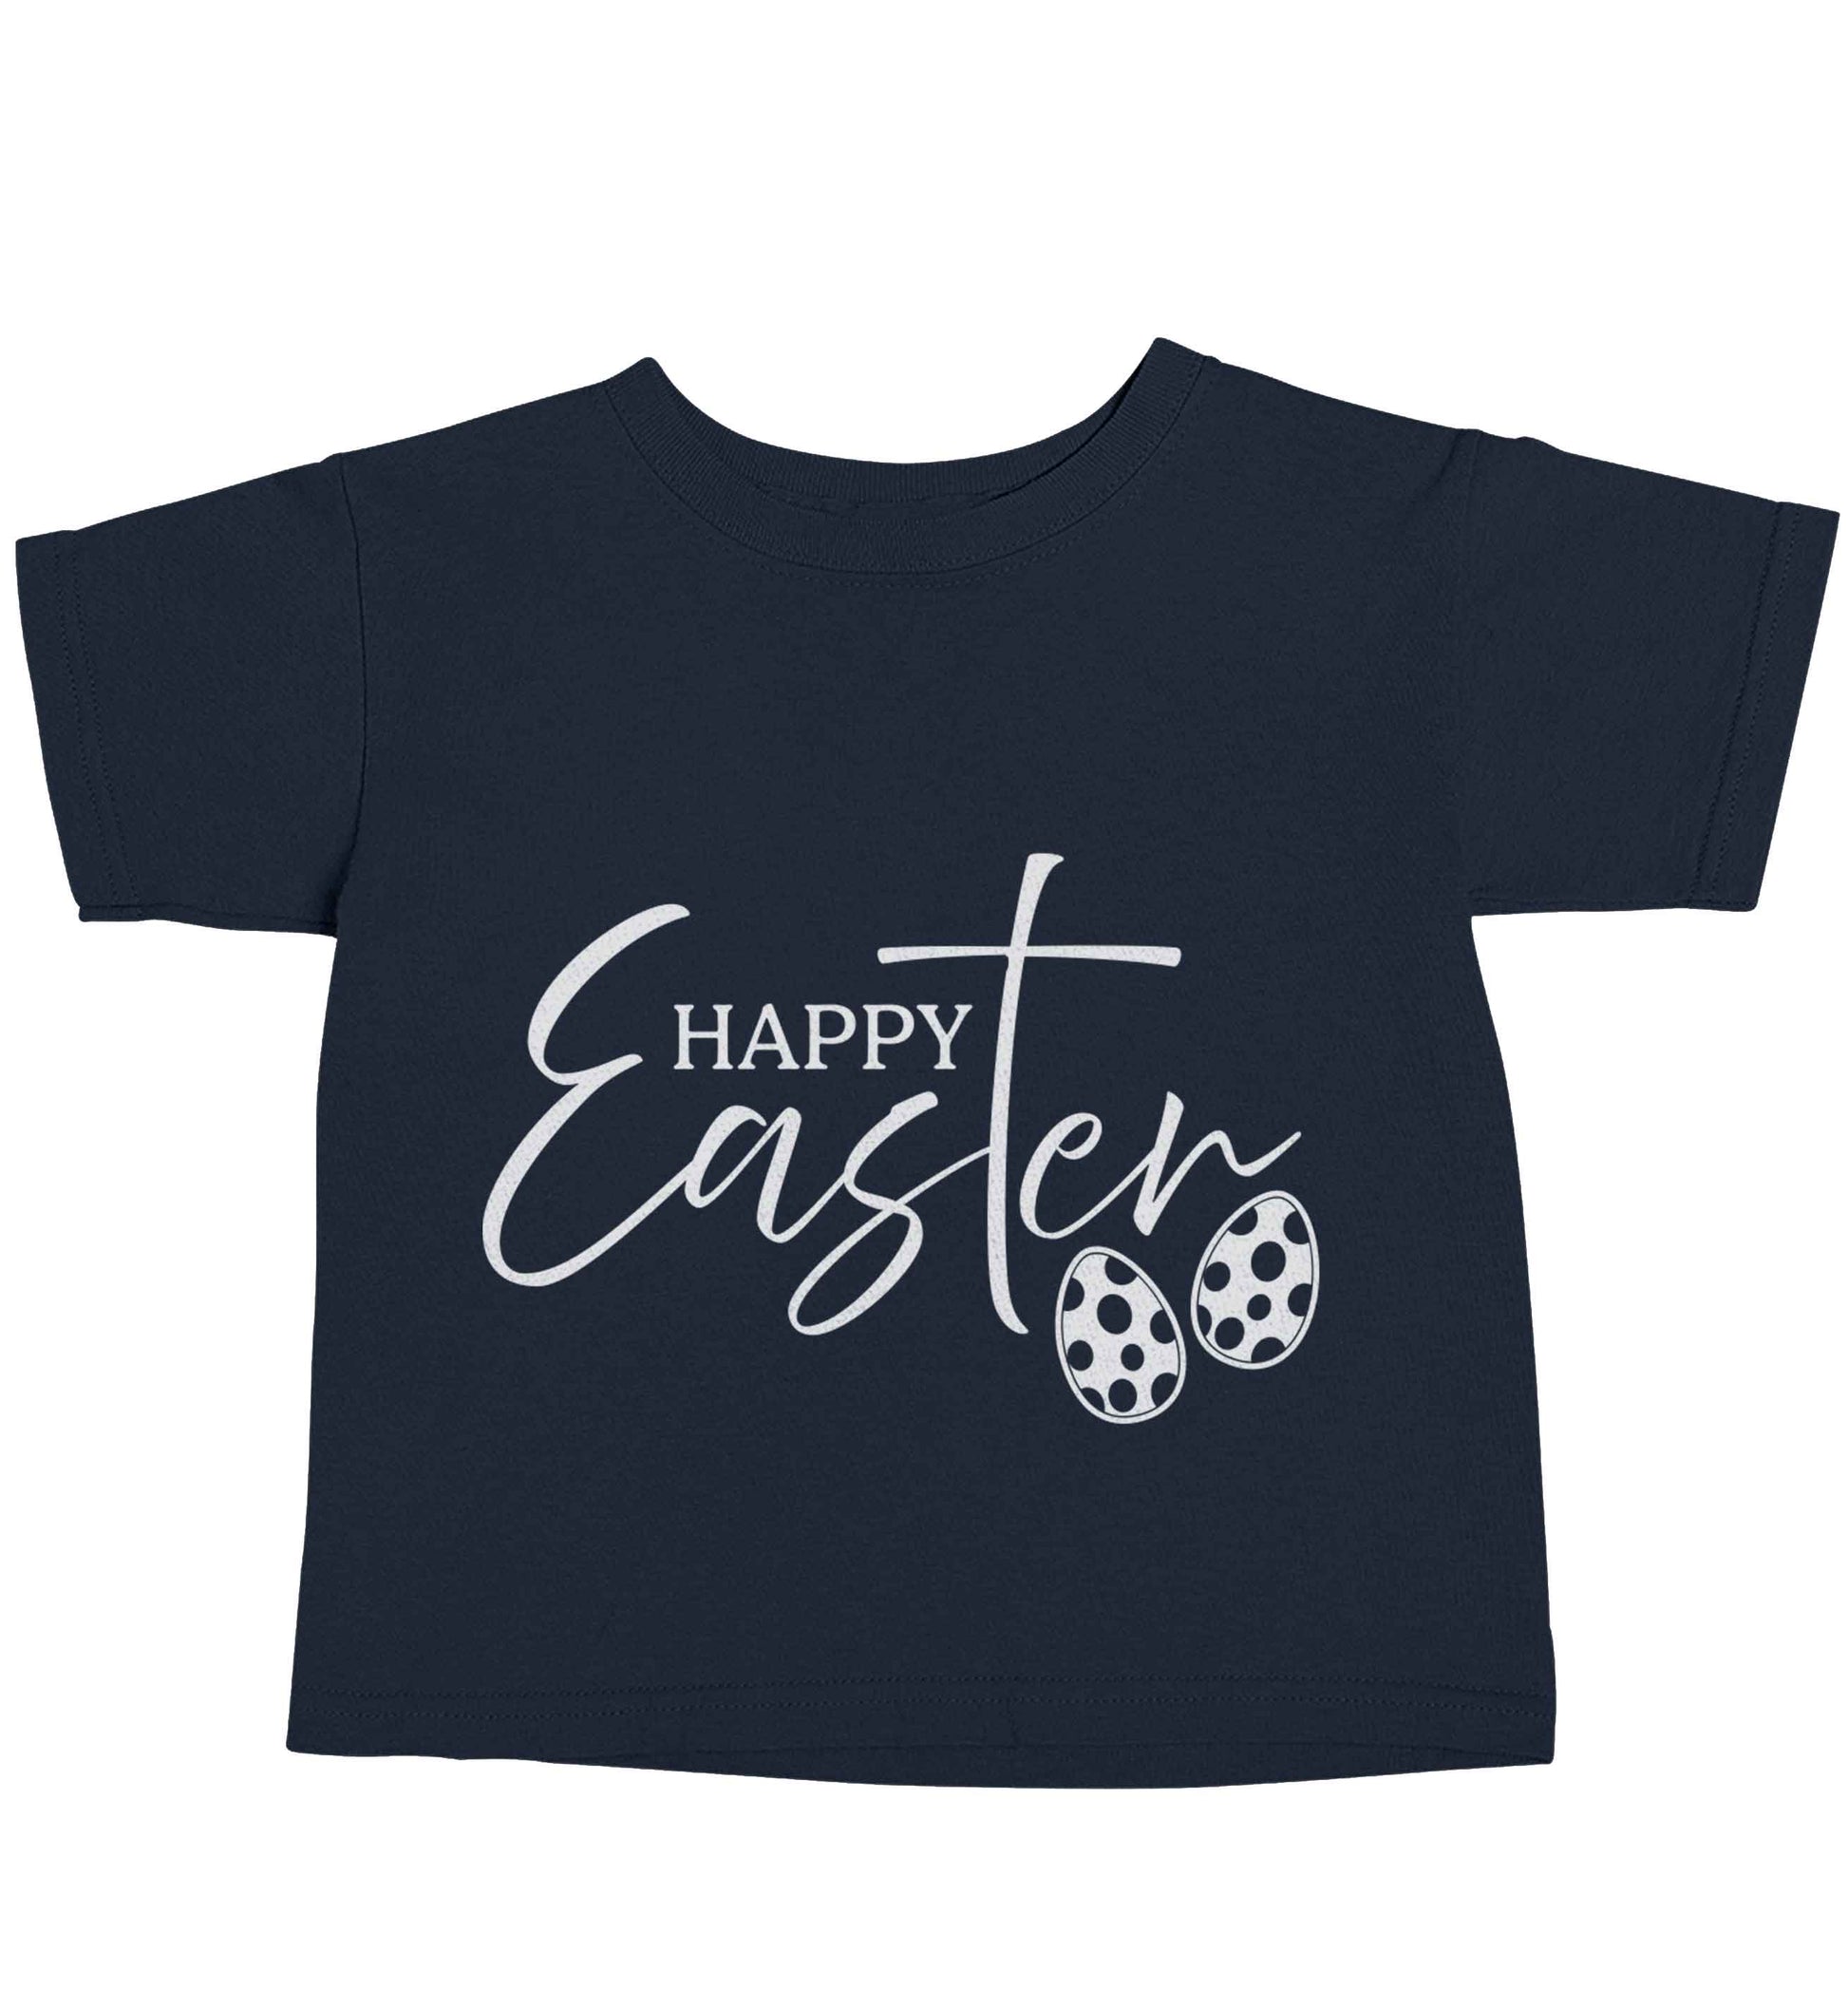 Happy Easter navy baby toddler Tshirt 2 Years